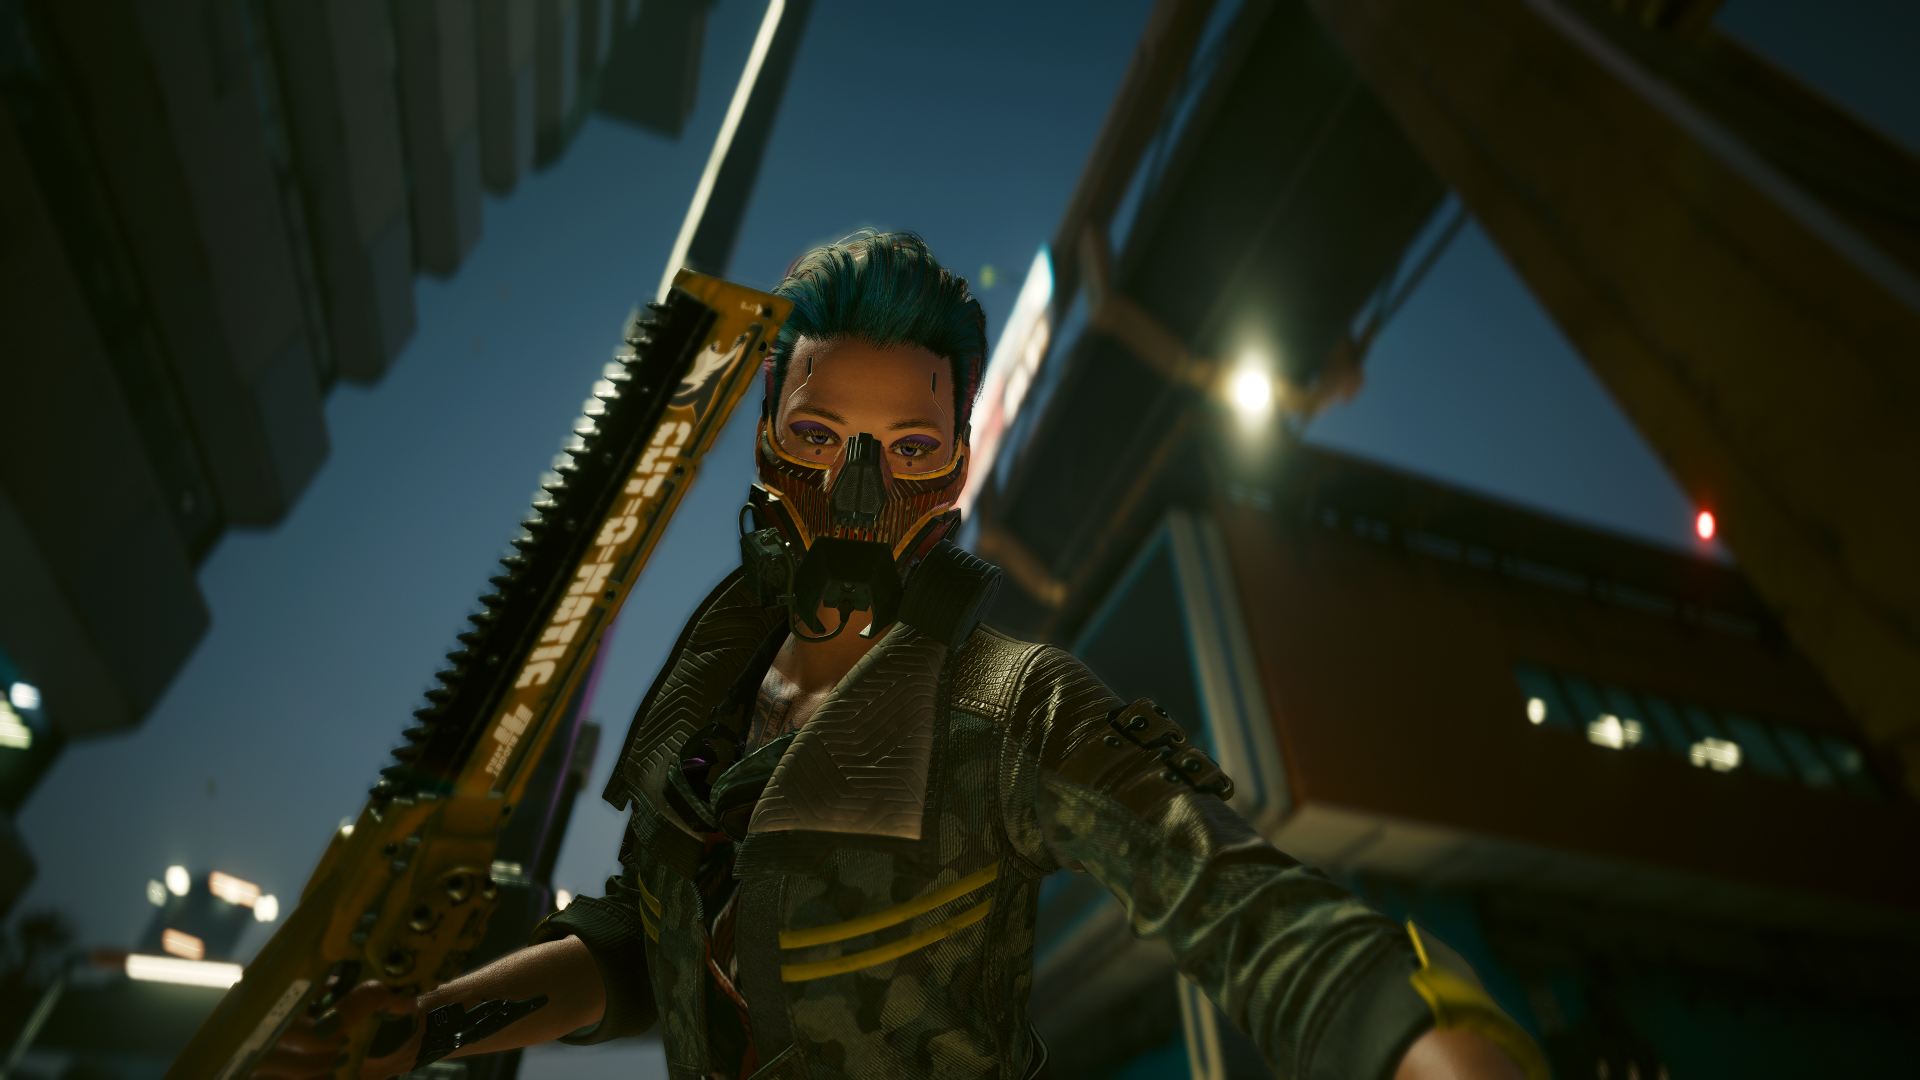 Cyberpunk 2077 Update 2.1 Includes a Devastating Reference to